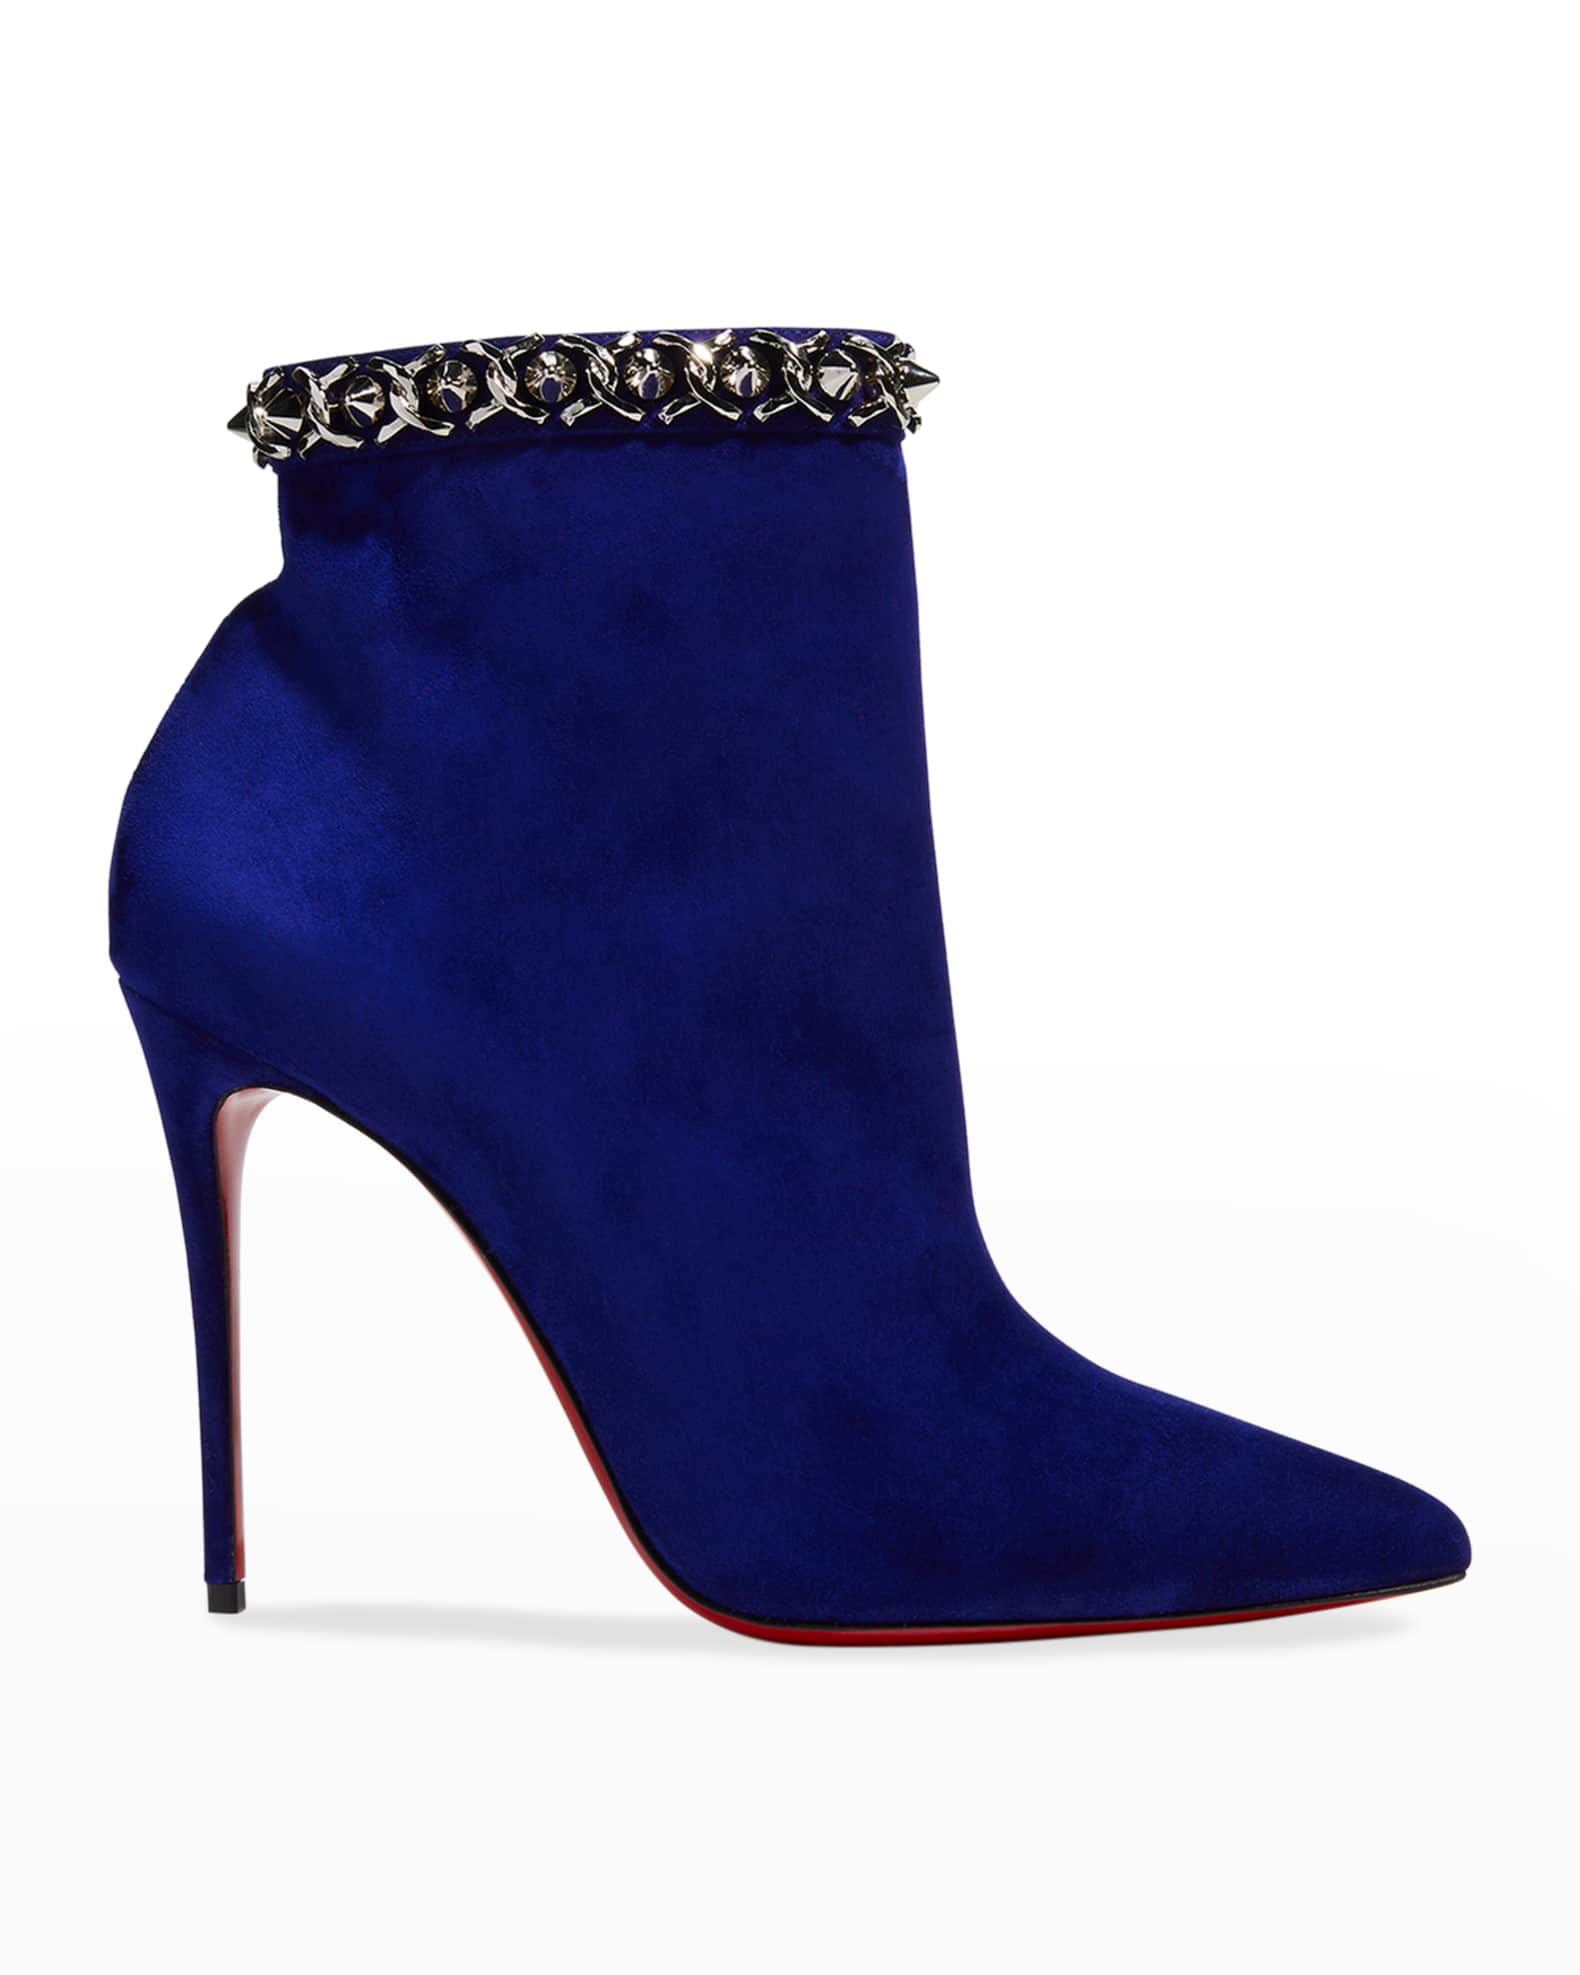 Christian Louboutin Booty Chain Red Sole Booties | Neiman Marcus